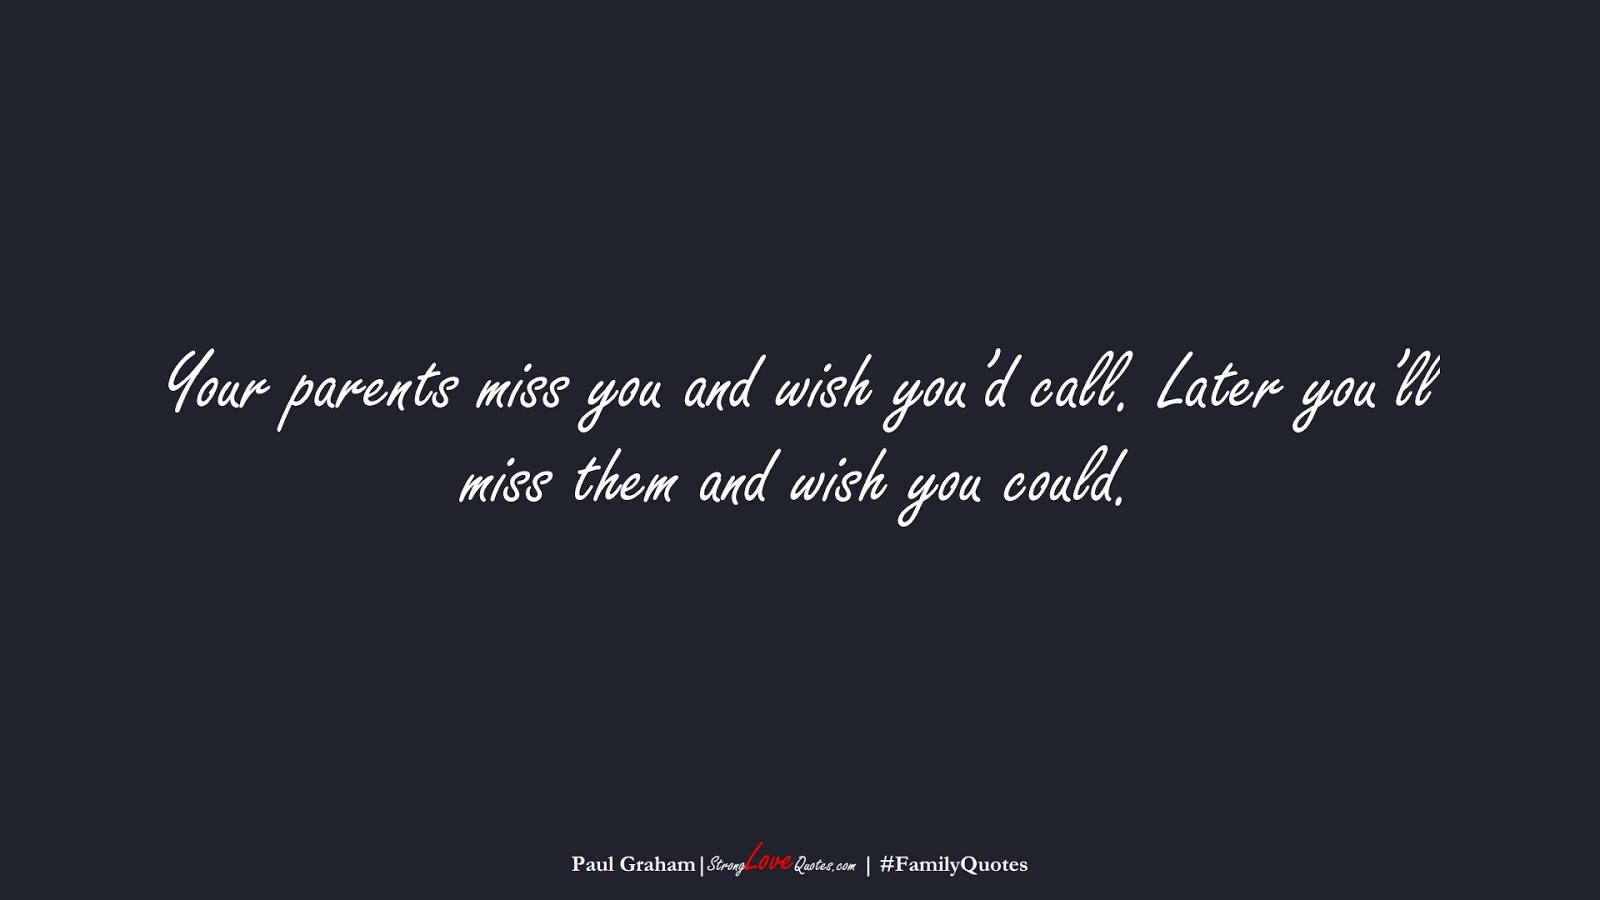 Your parents miss you and wish you’d call. Later you’ll miss them and wish you could. (Paul Graham);  #FamilyQuotes